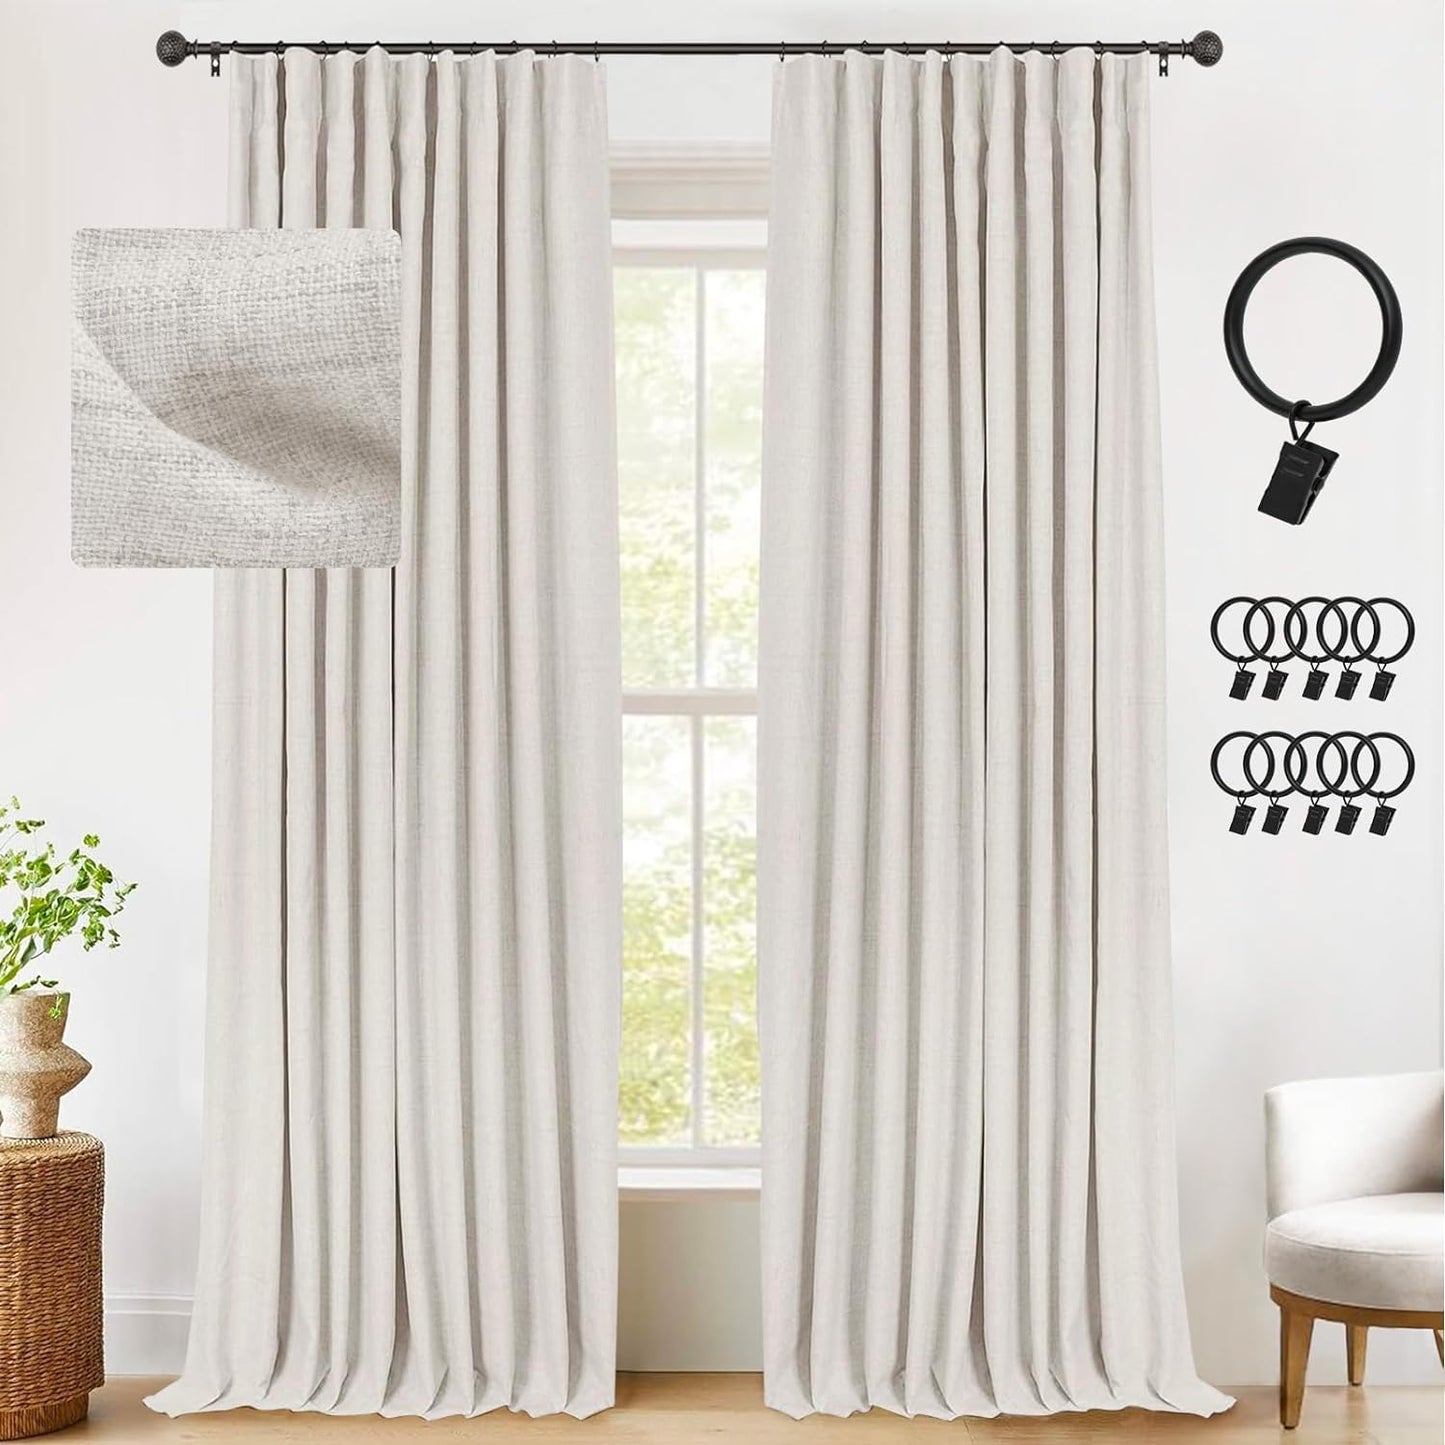 INOVADAY Linen Blackout Curtains 96 Inches Long, Thermal Insulated Black Out Curtains & Drapes for Living Room Bedroom (W50 X L96 1 Panels, Beige)  INOVADAY Beige 50"W X 96"L 